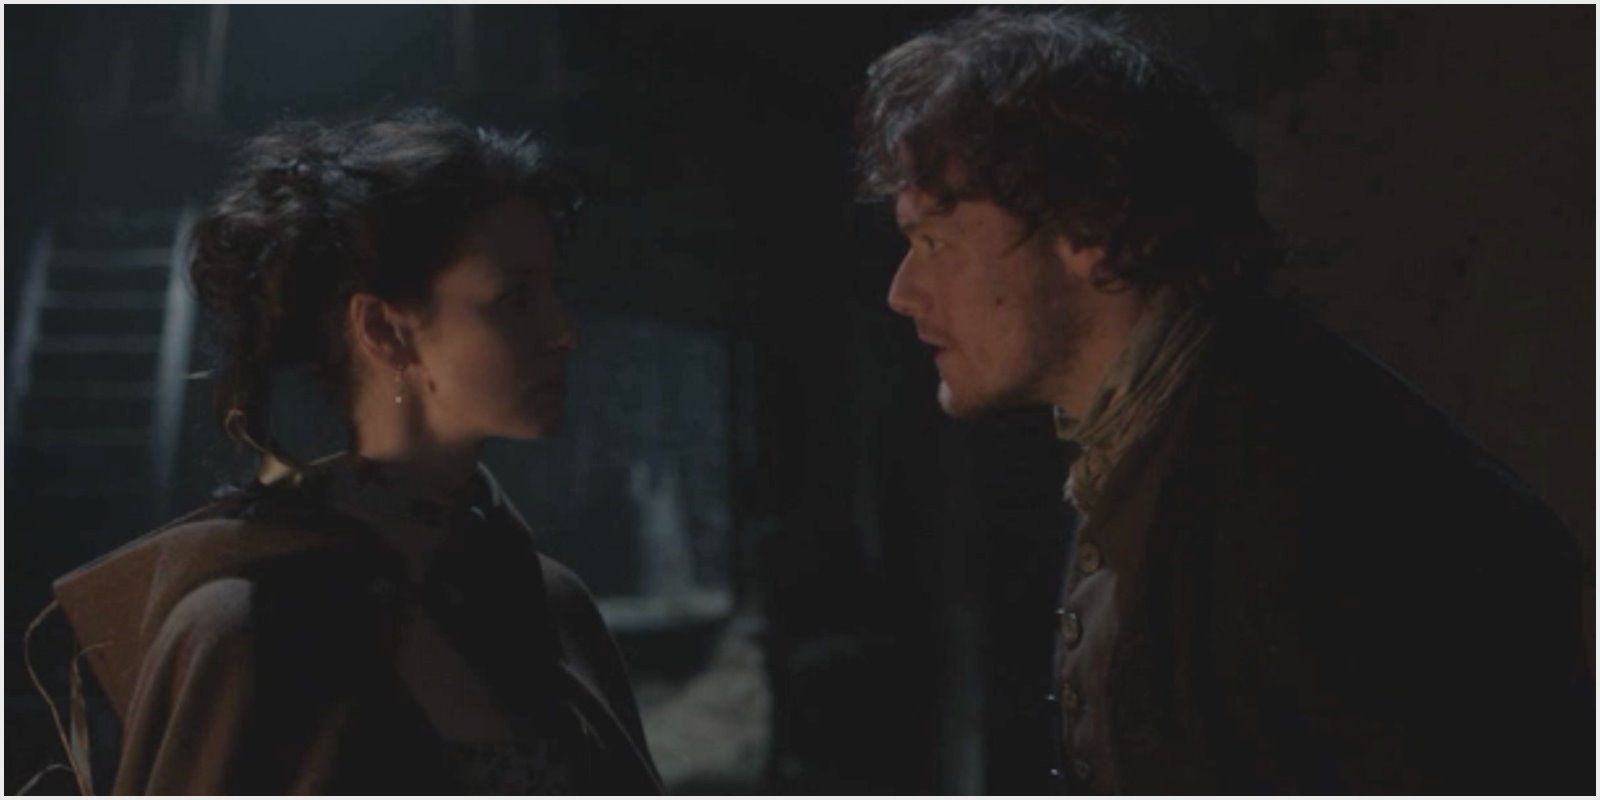 Outlander The 10 Best Episodes In Season 1 (According to IMDb)